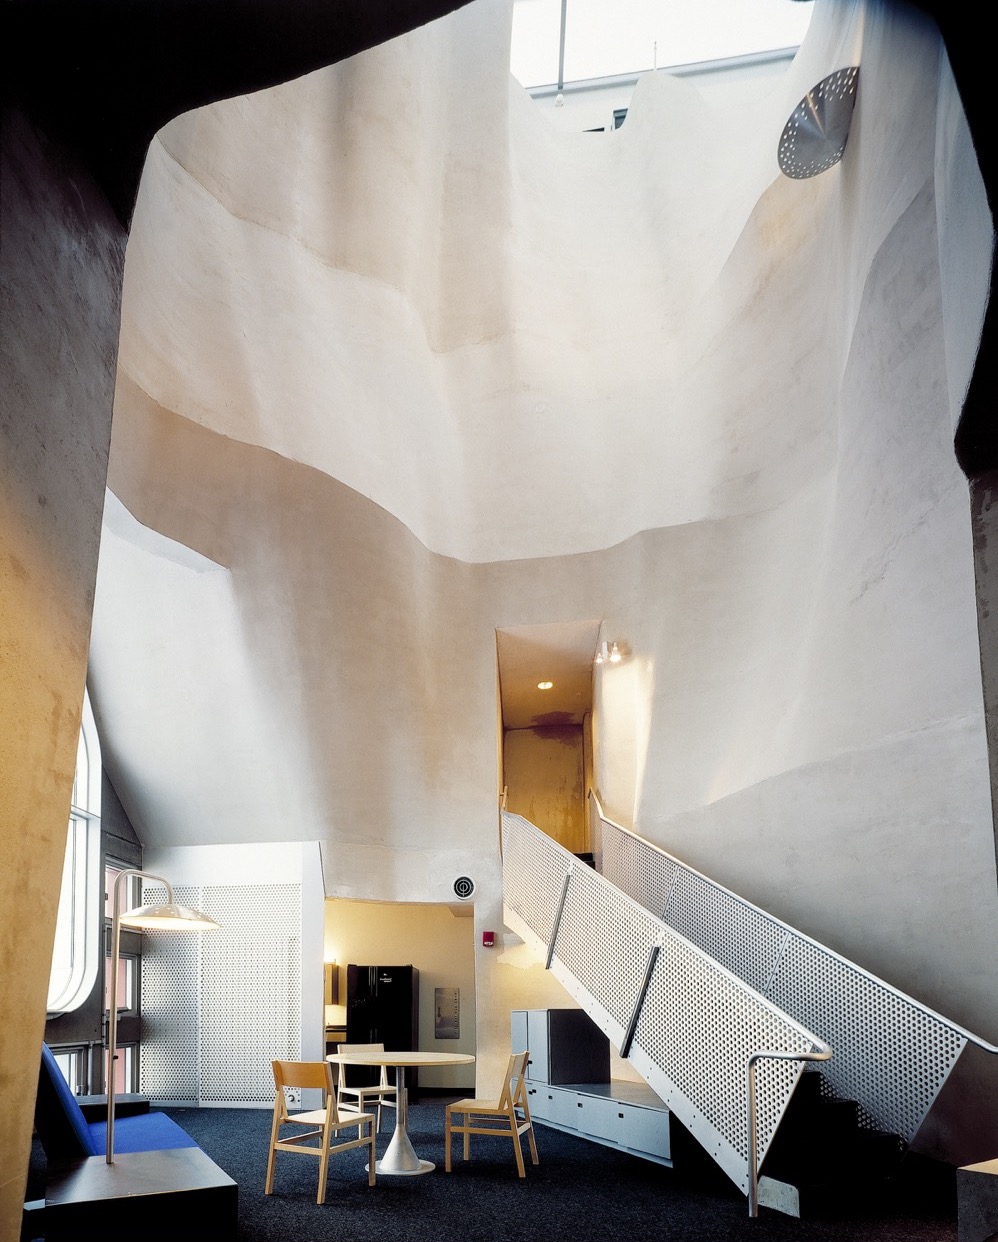 April 5th: Steven Holl lecture at Rensselaer Polytechnic Institute (RPI)